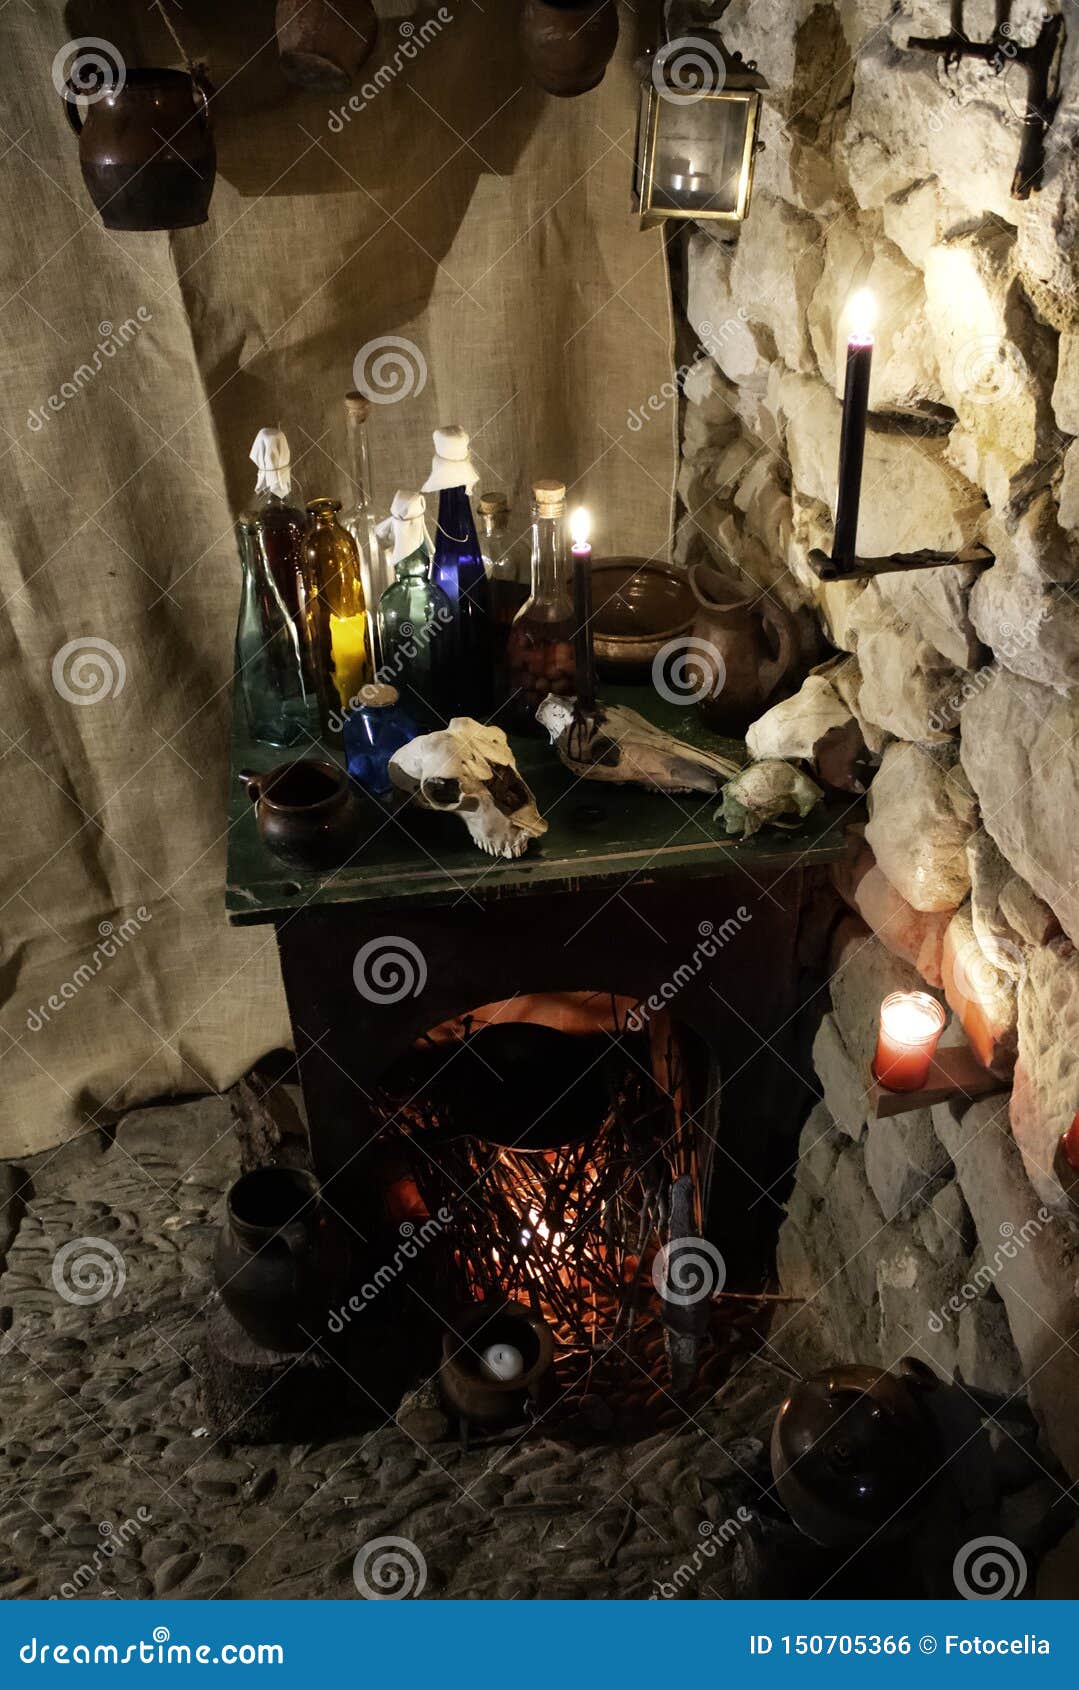 Witchcraft potions stock photo. Image of chemist, objects - 150705366